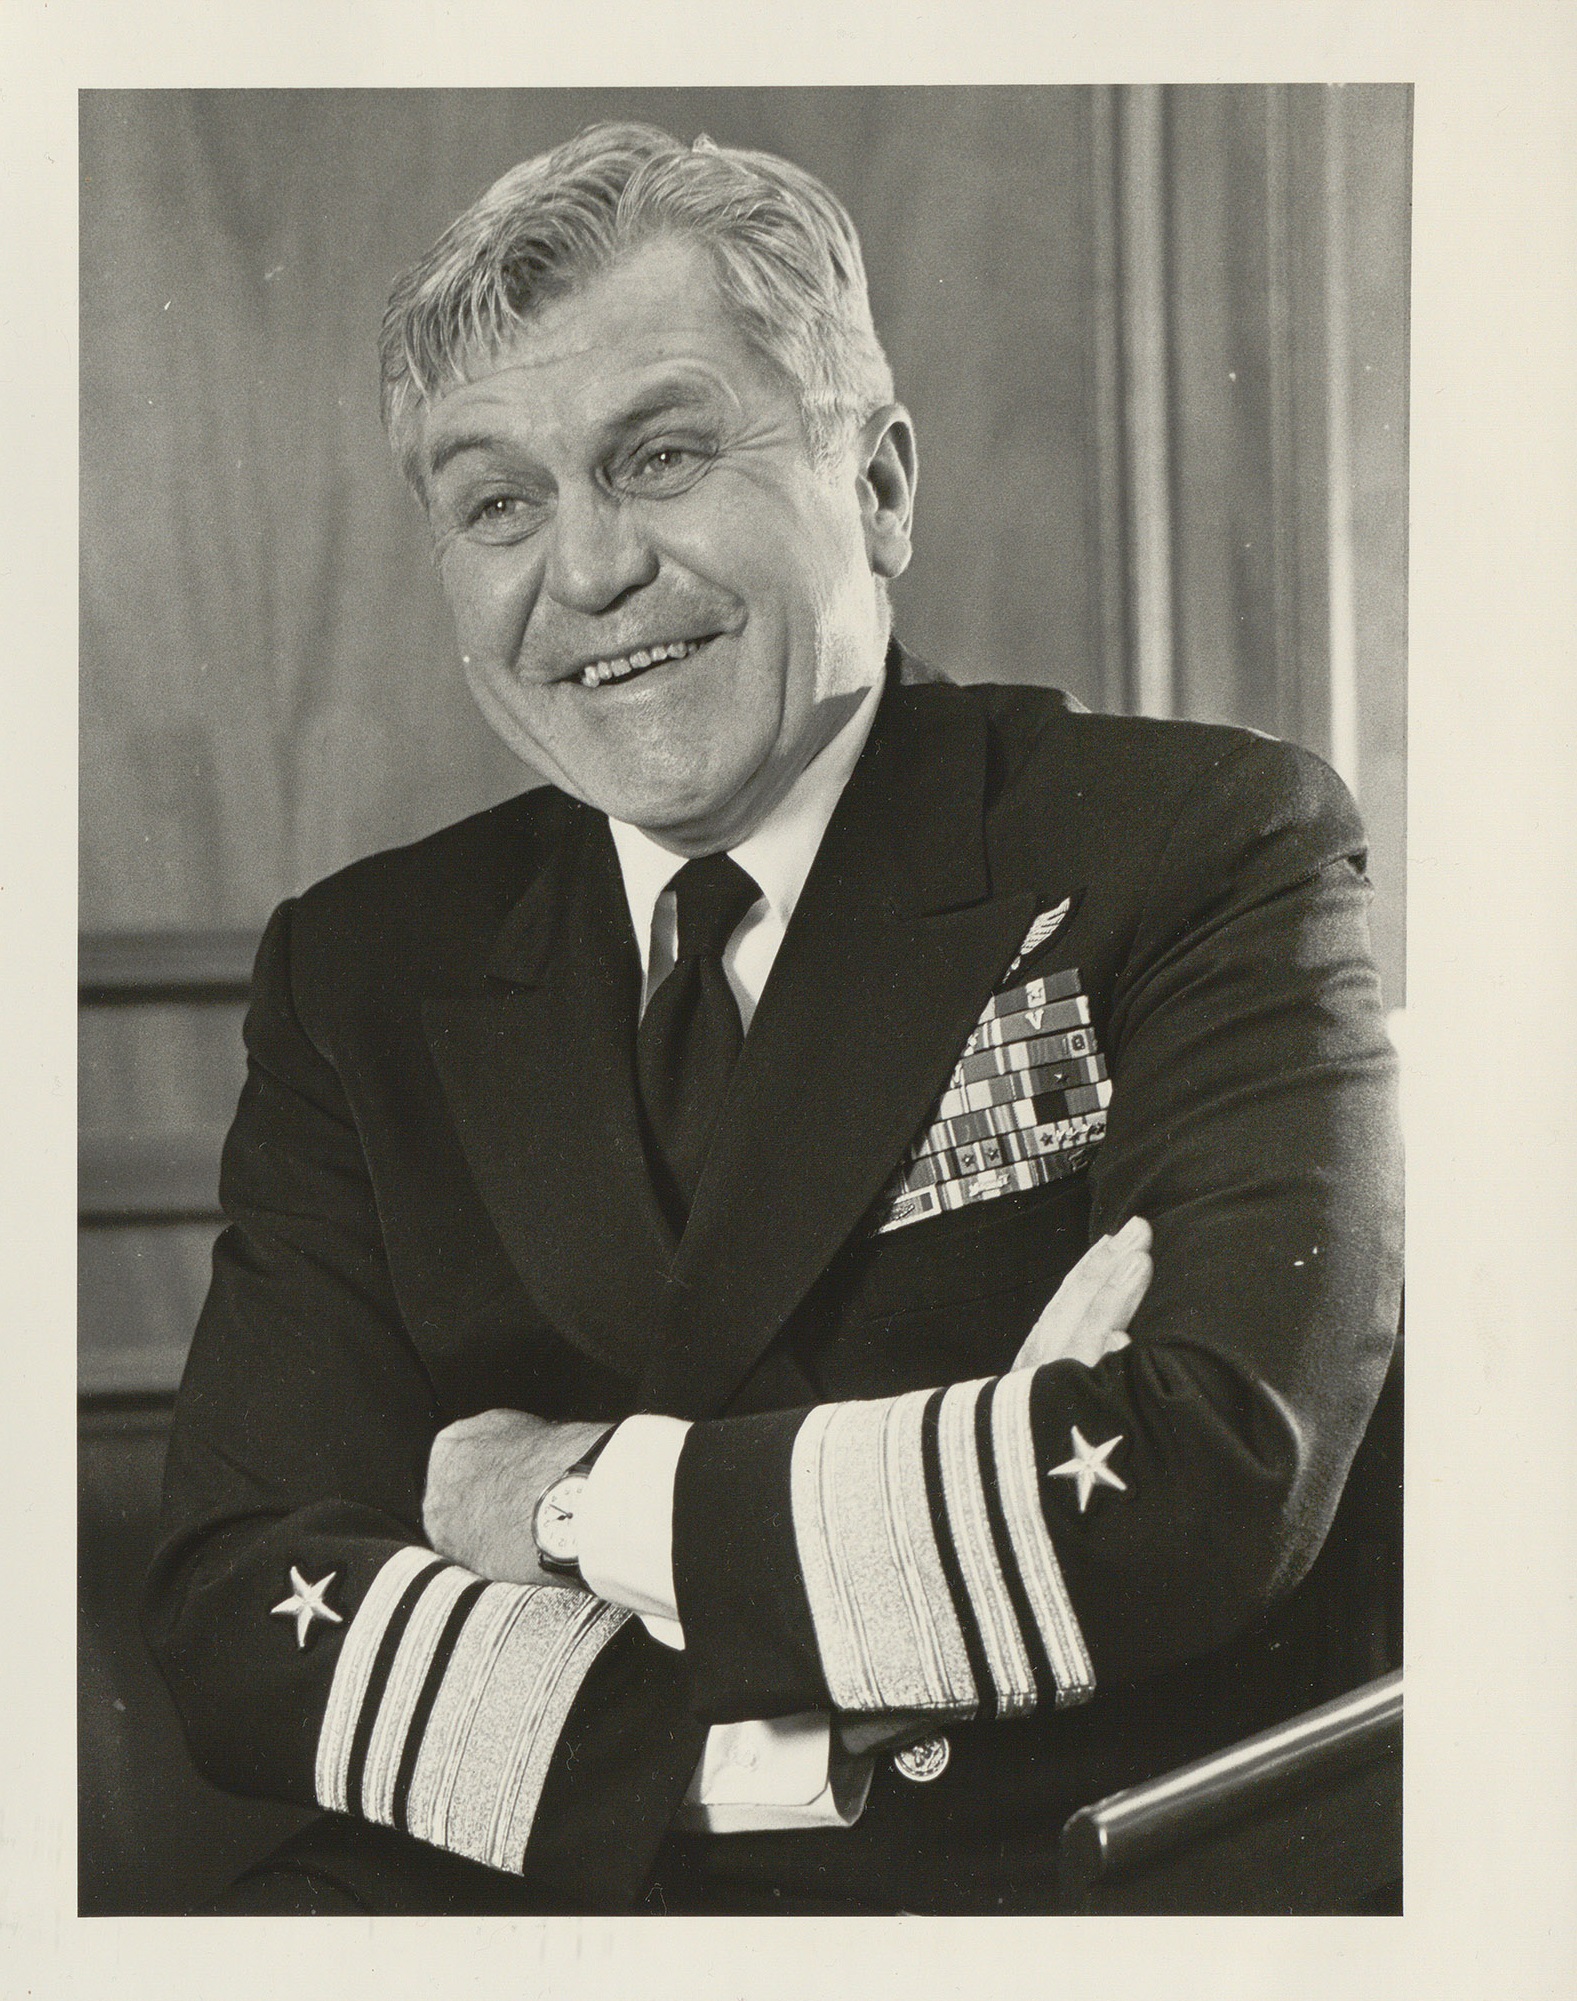 Portrait of VADM Stockdale laughing with arms crossed